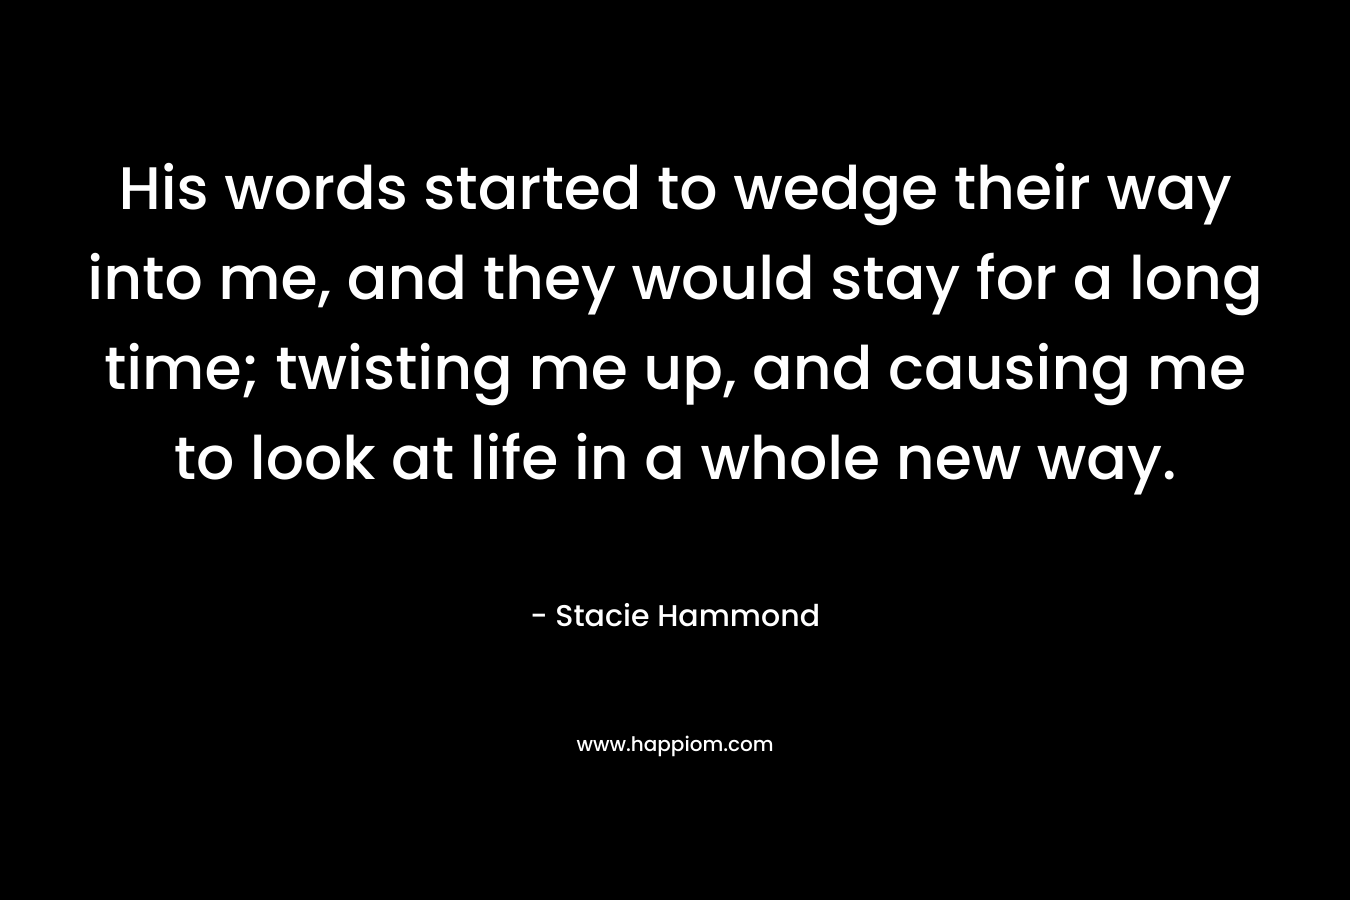 His words started to wedge their way into me, and they would stay for a long time; twisting me up, and causing me to look at life in a whole new way. – Stacie Hammond